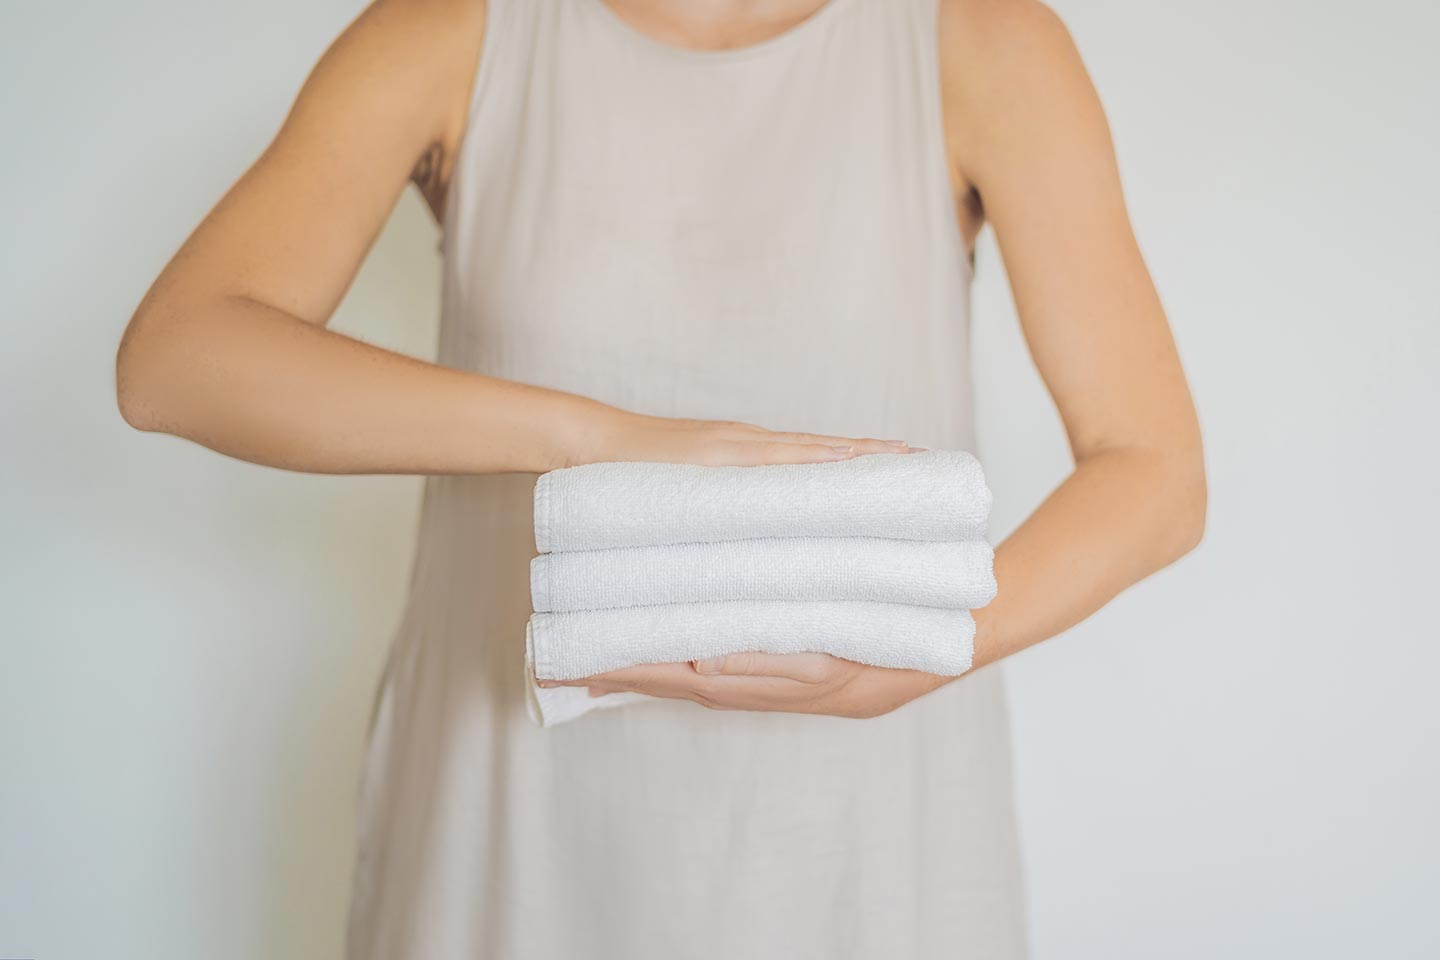 Person holding folded white towels